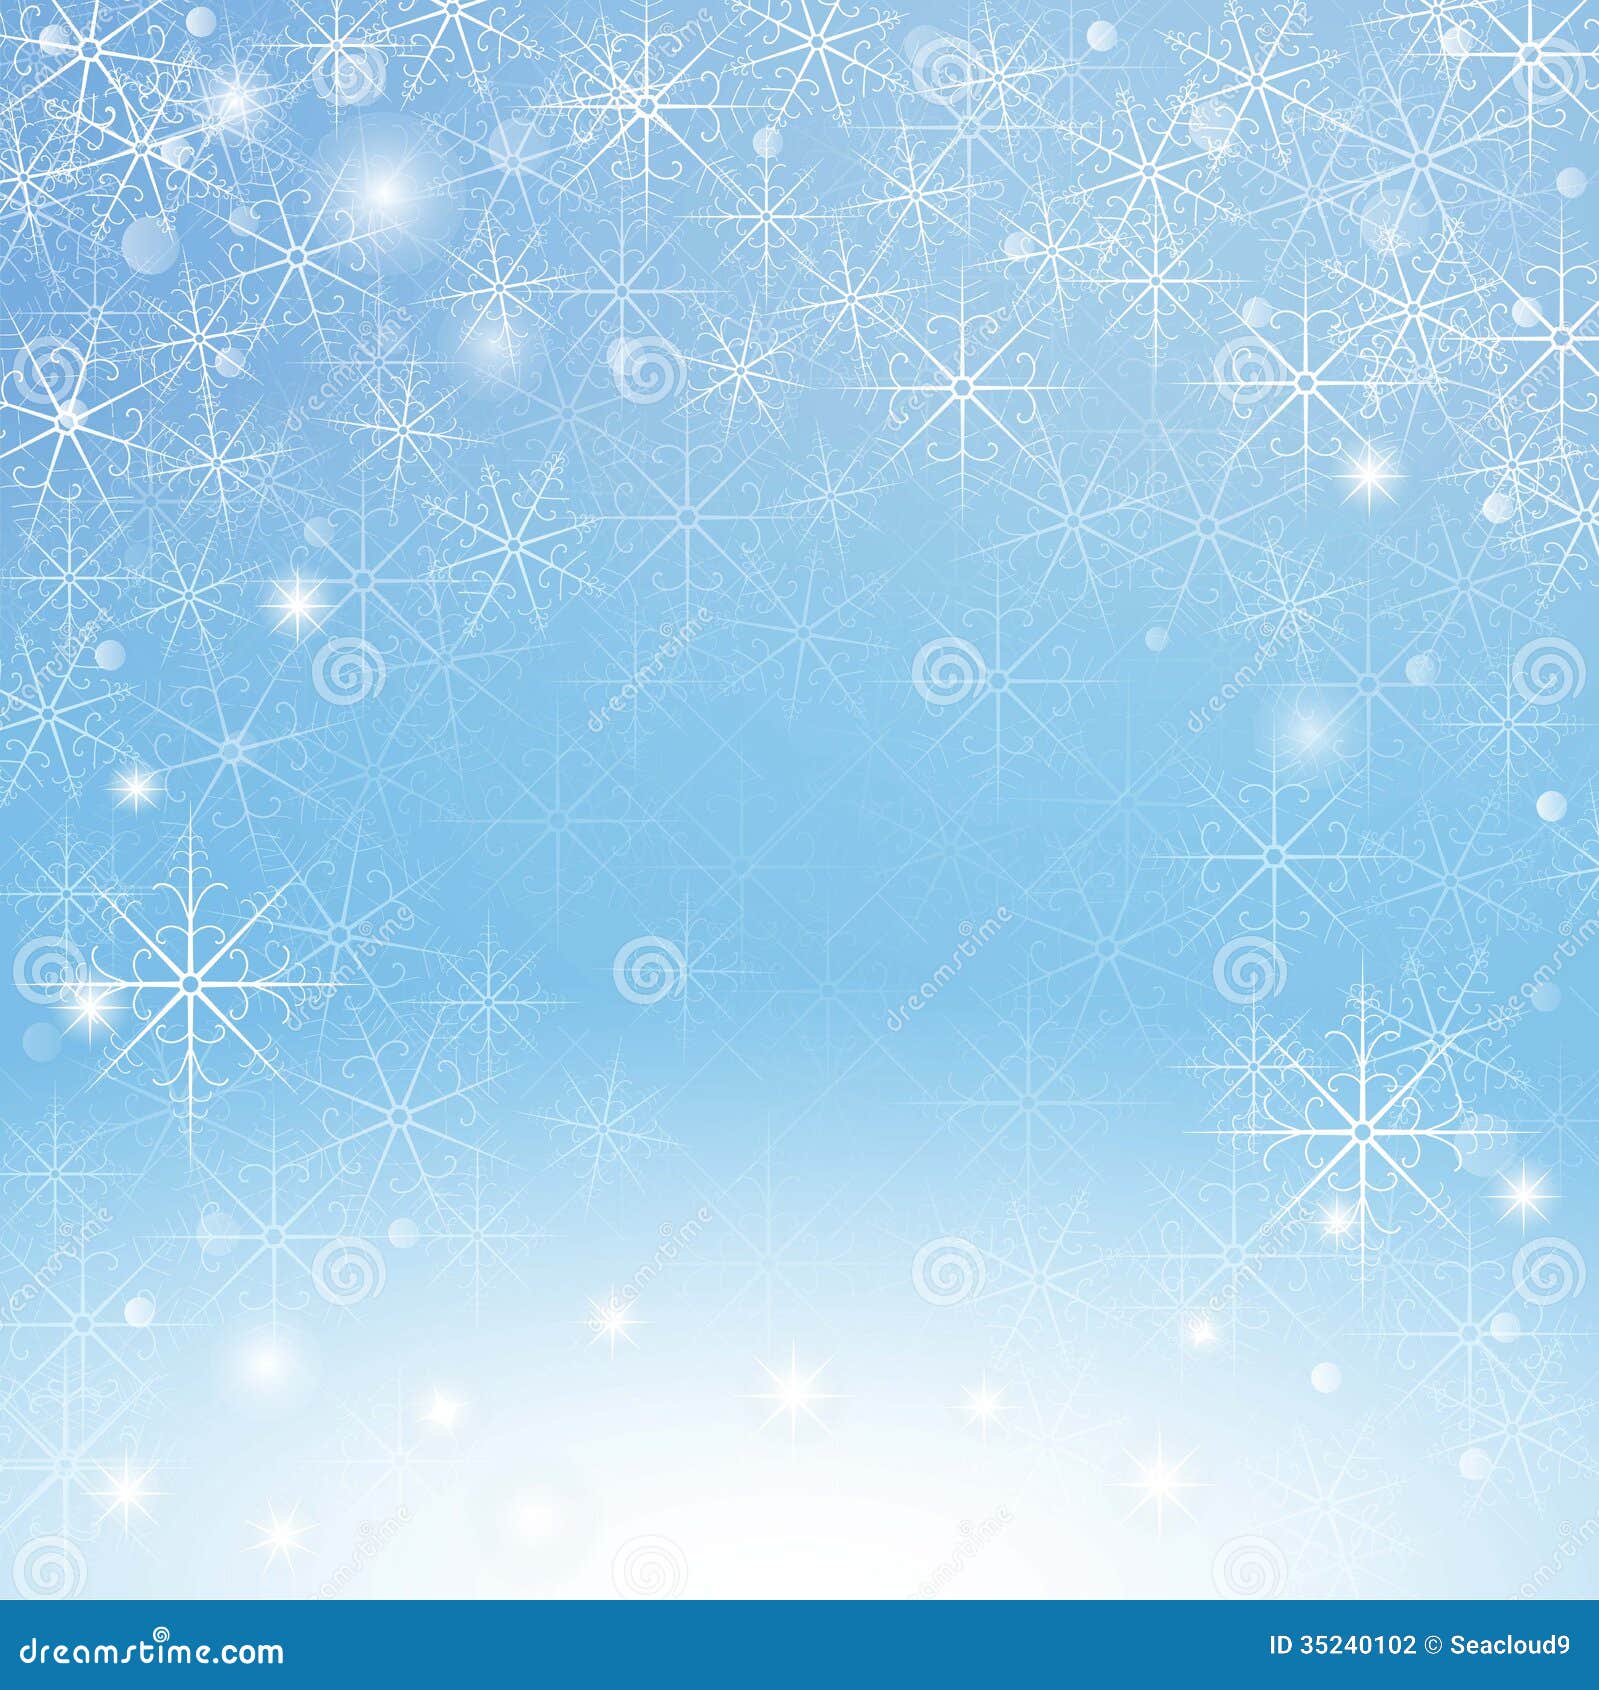 winter clipart background - photo #42